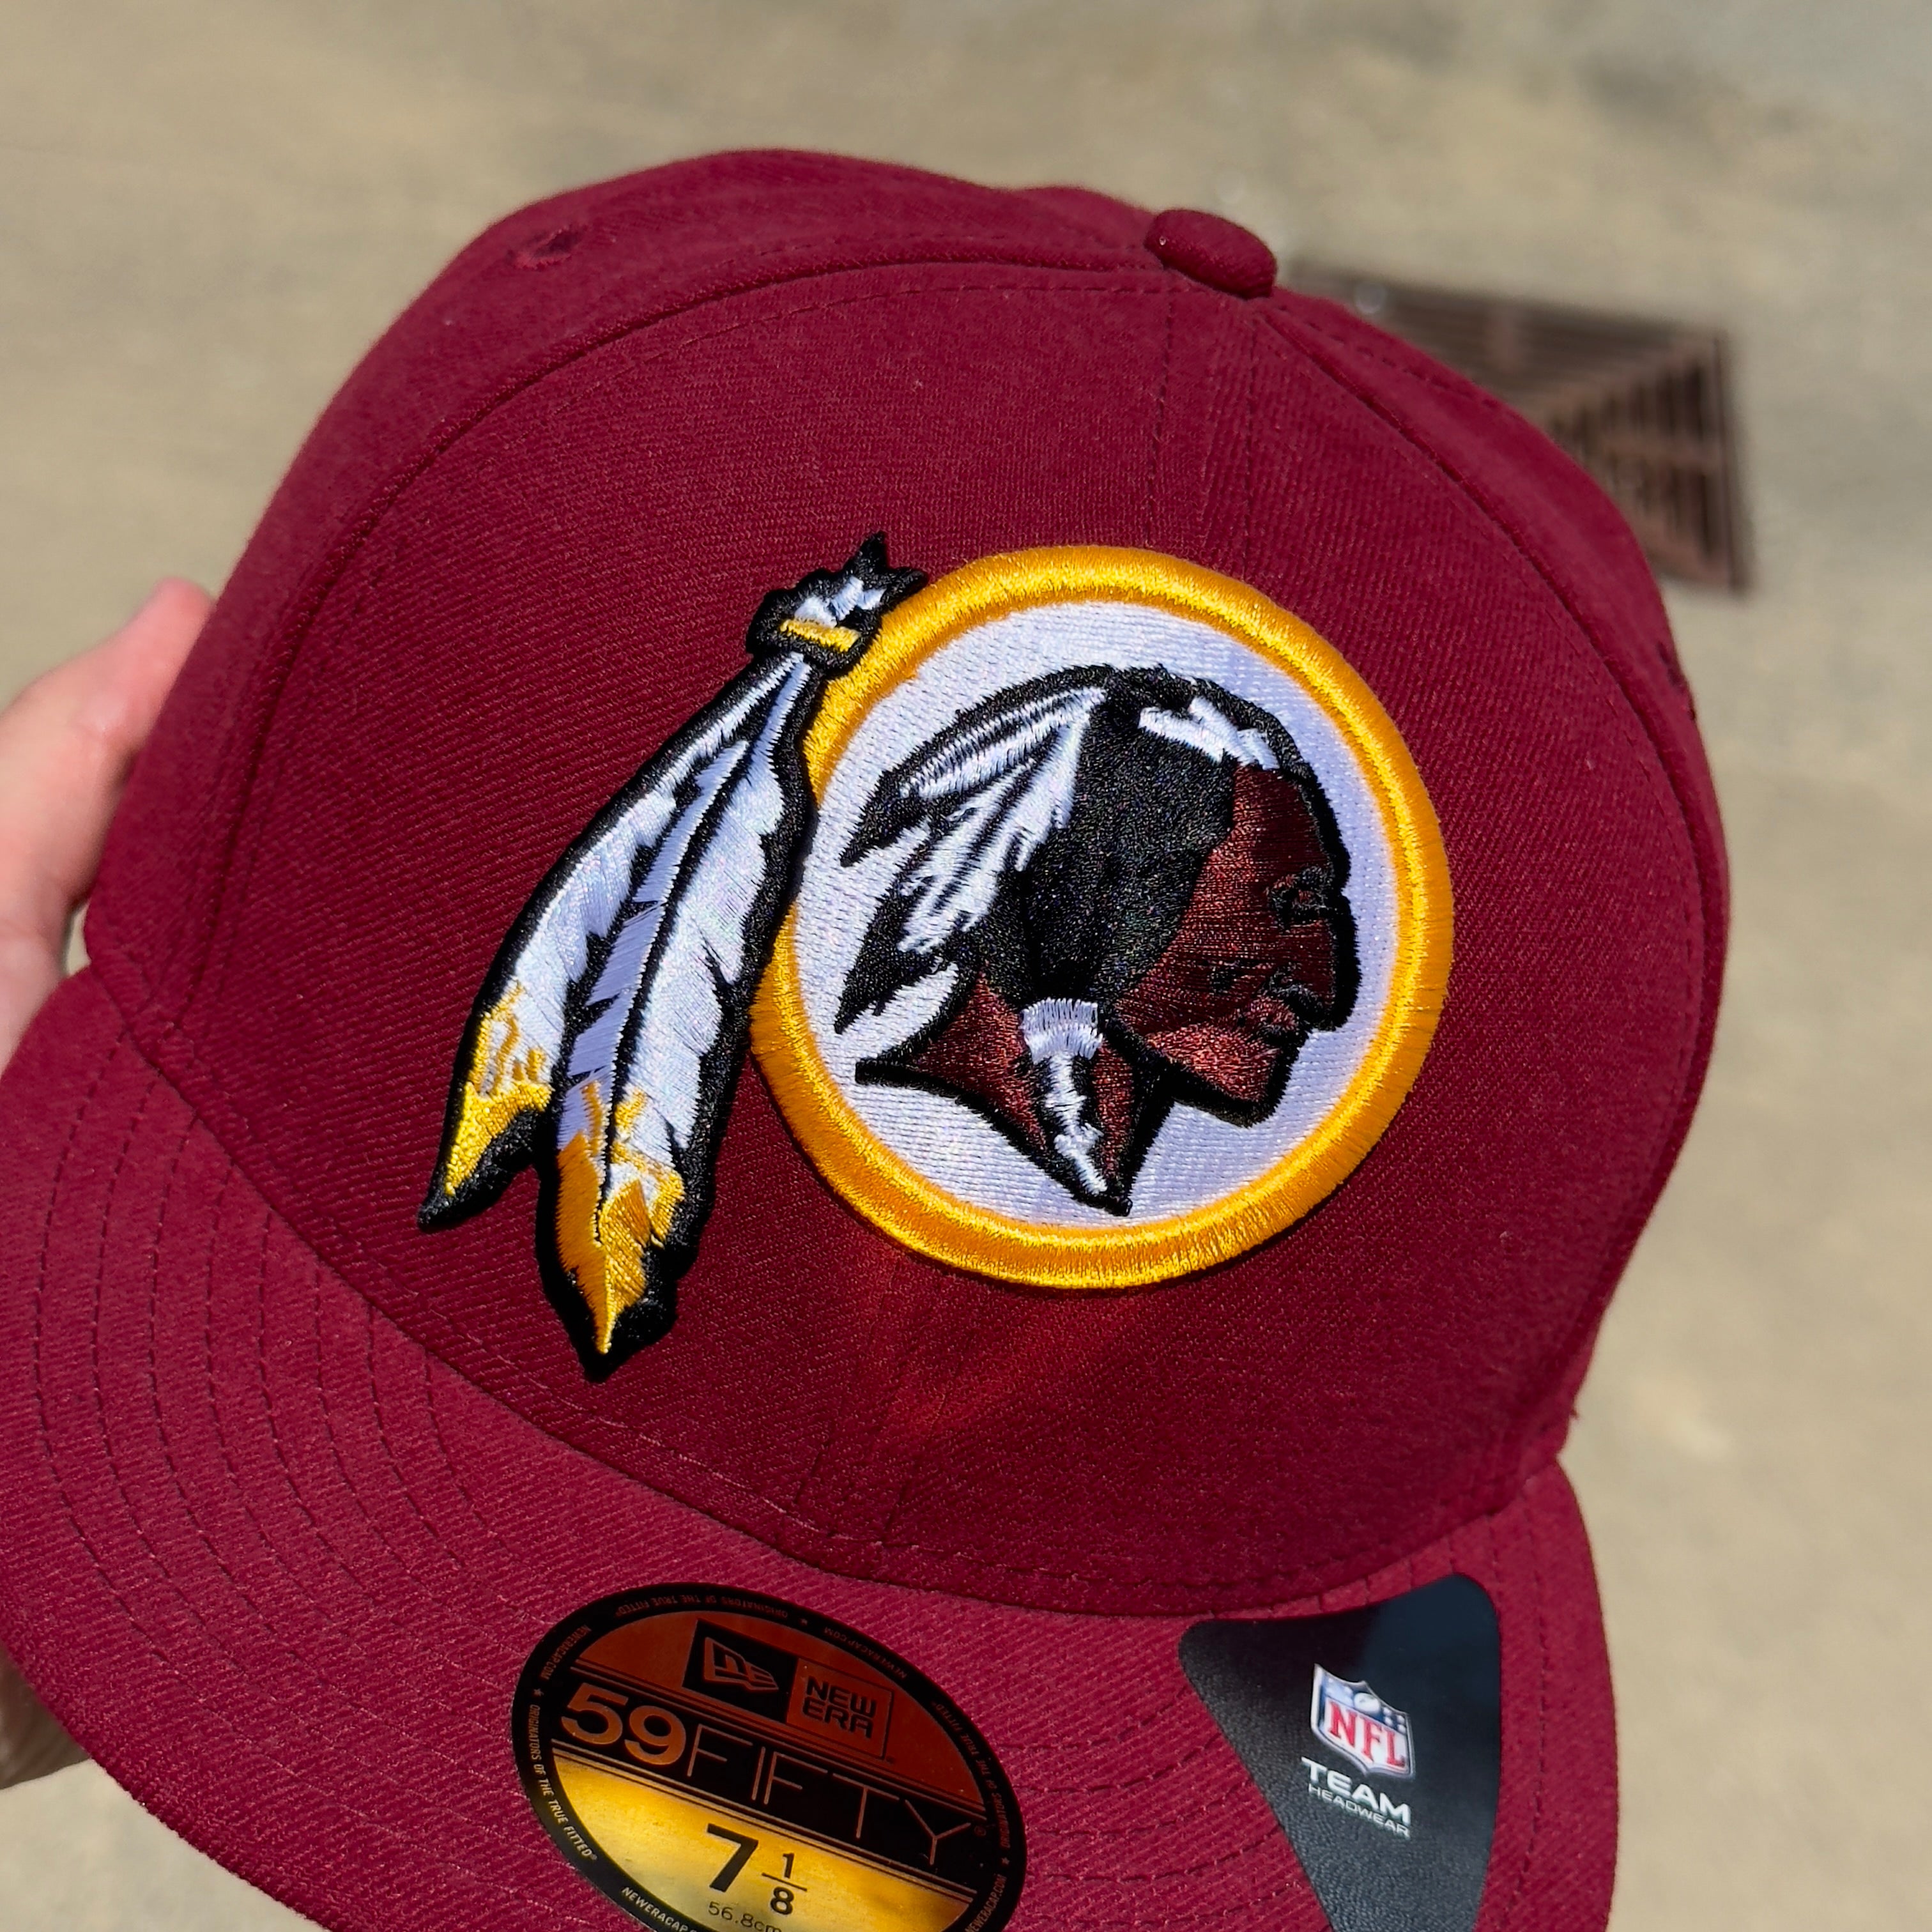 NEW Maroon 7 1/8 Washington Commanders Redskins NFL 59fifty New Era Fitted Hat Cap